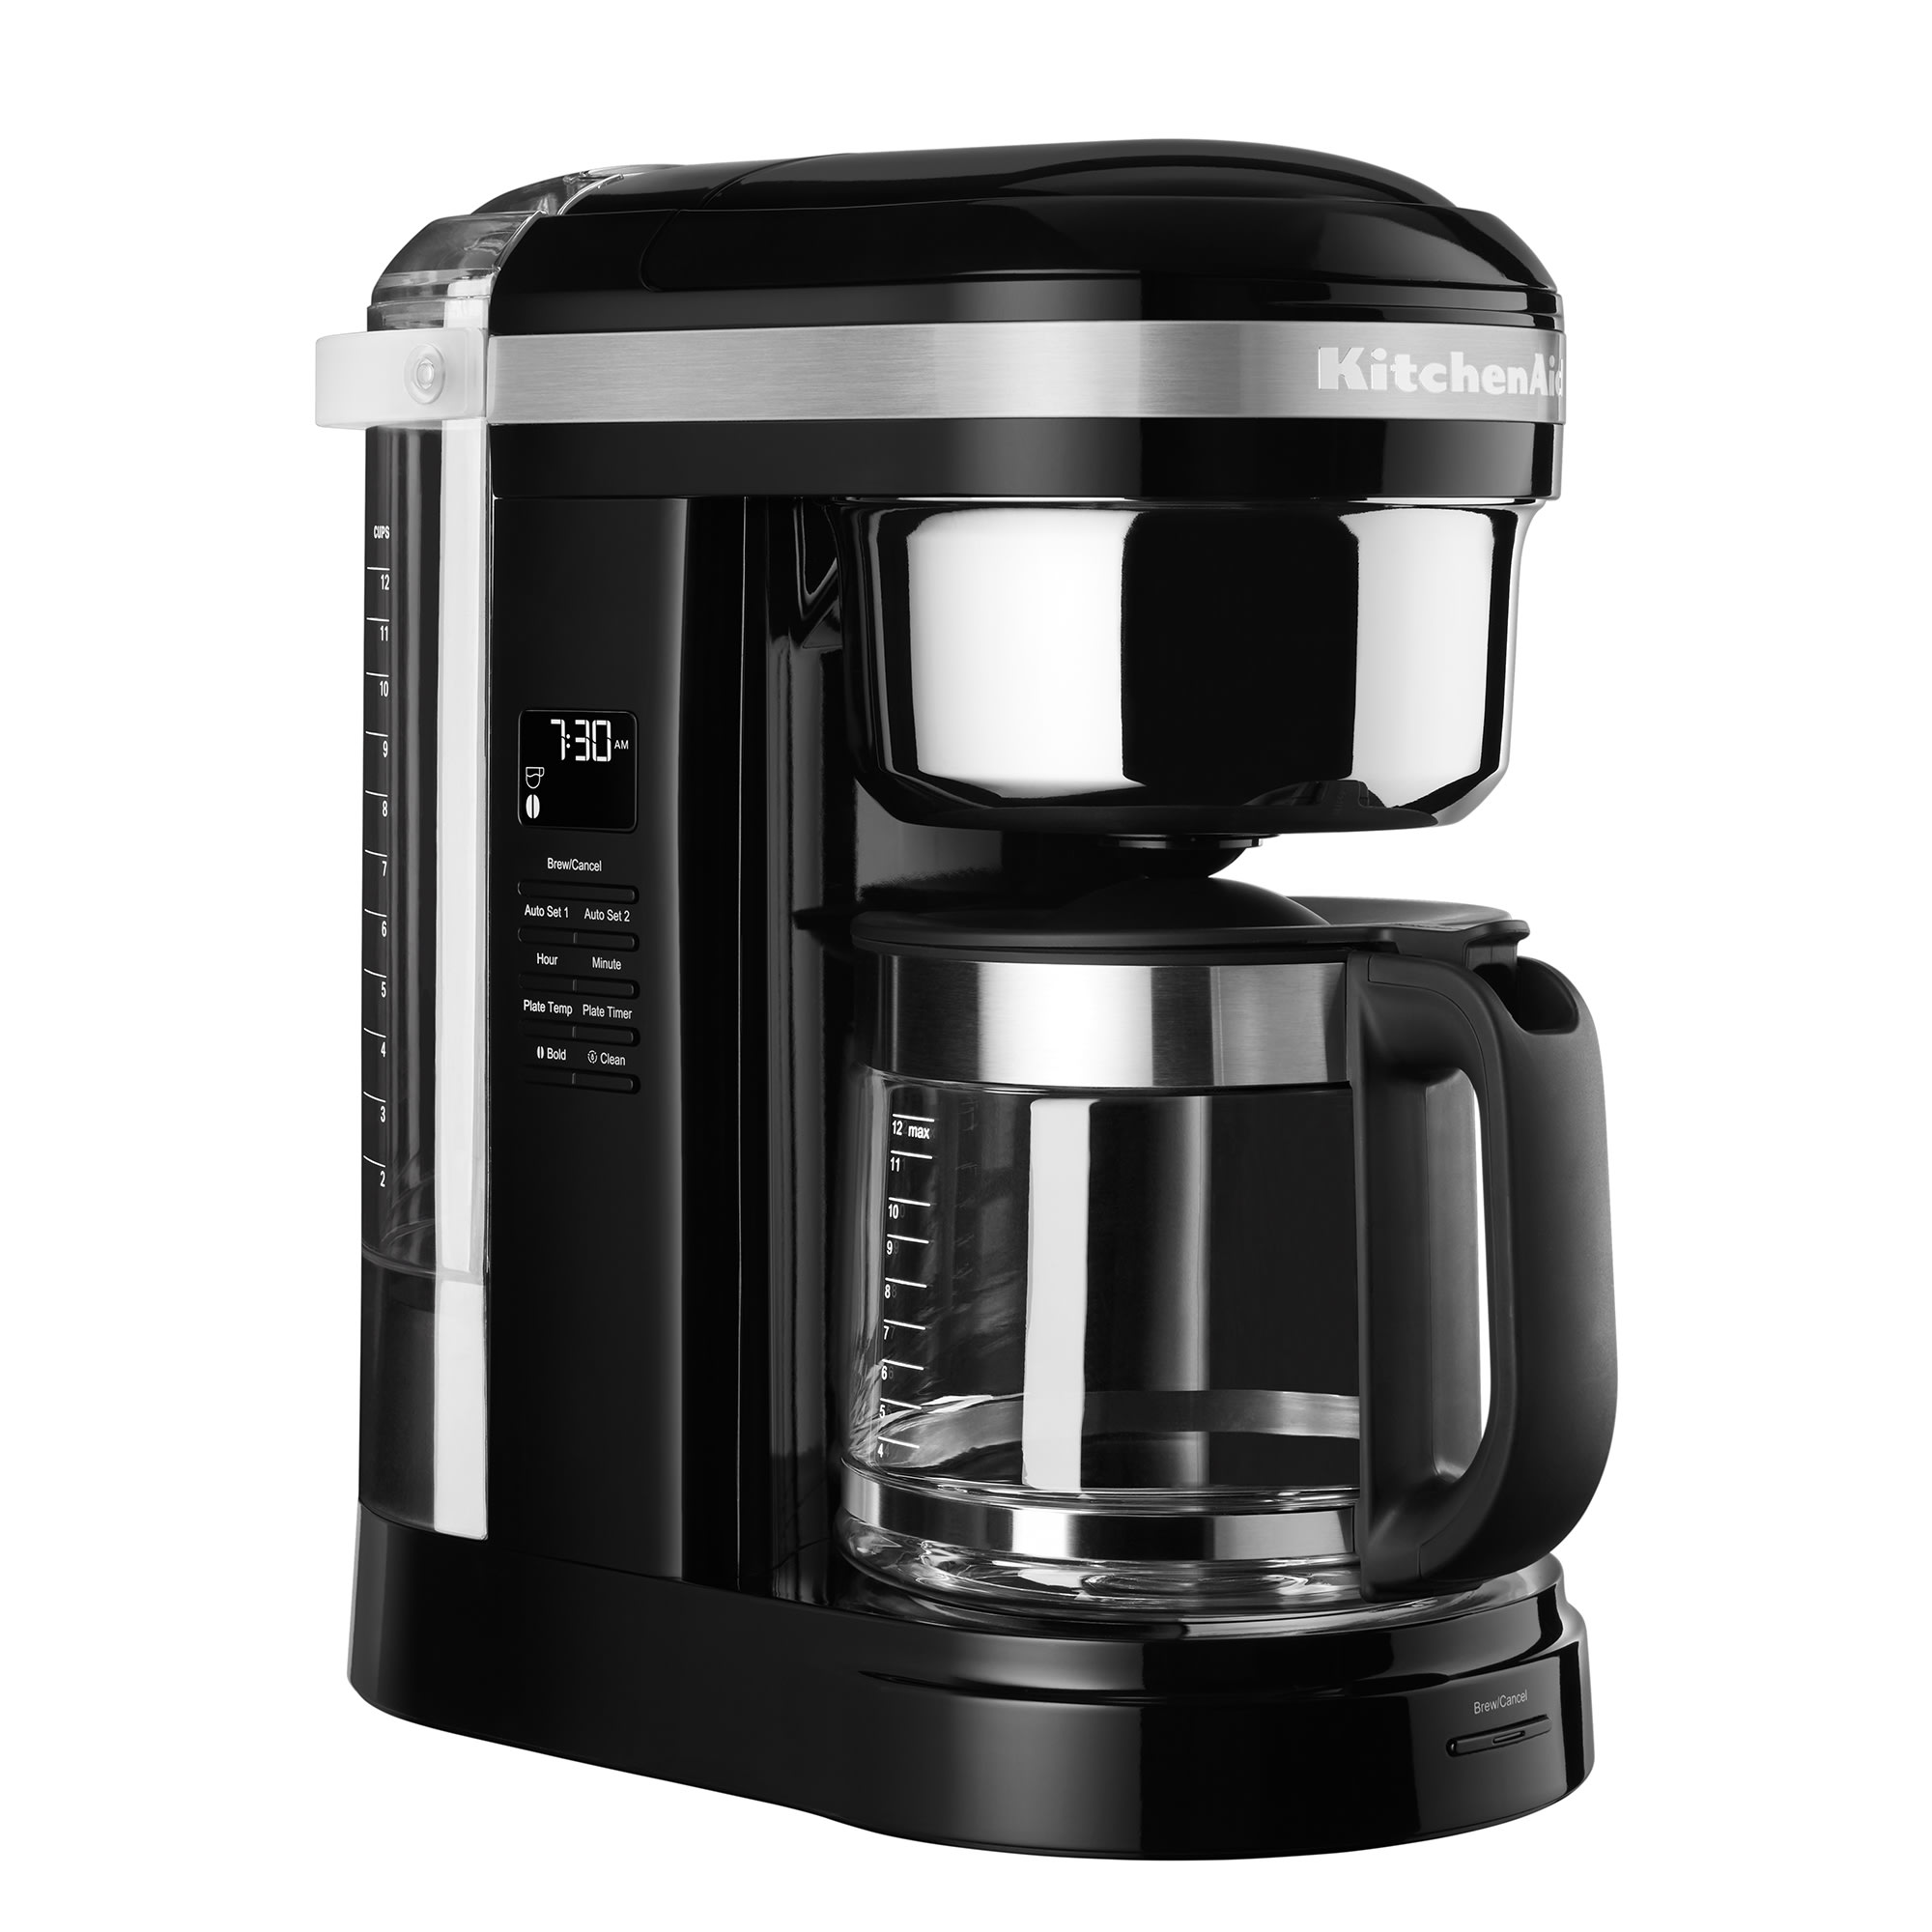 KitchenAid 12-Cup Onyx Black Residential Coffee Maker at